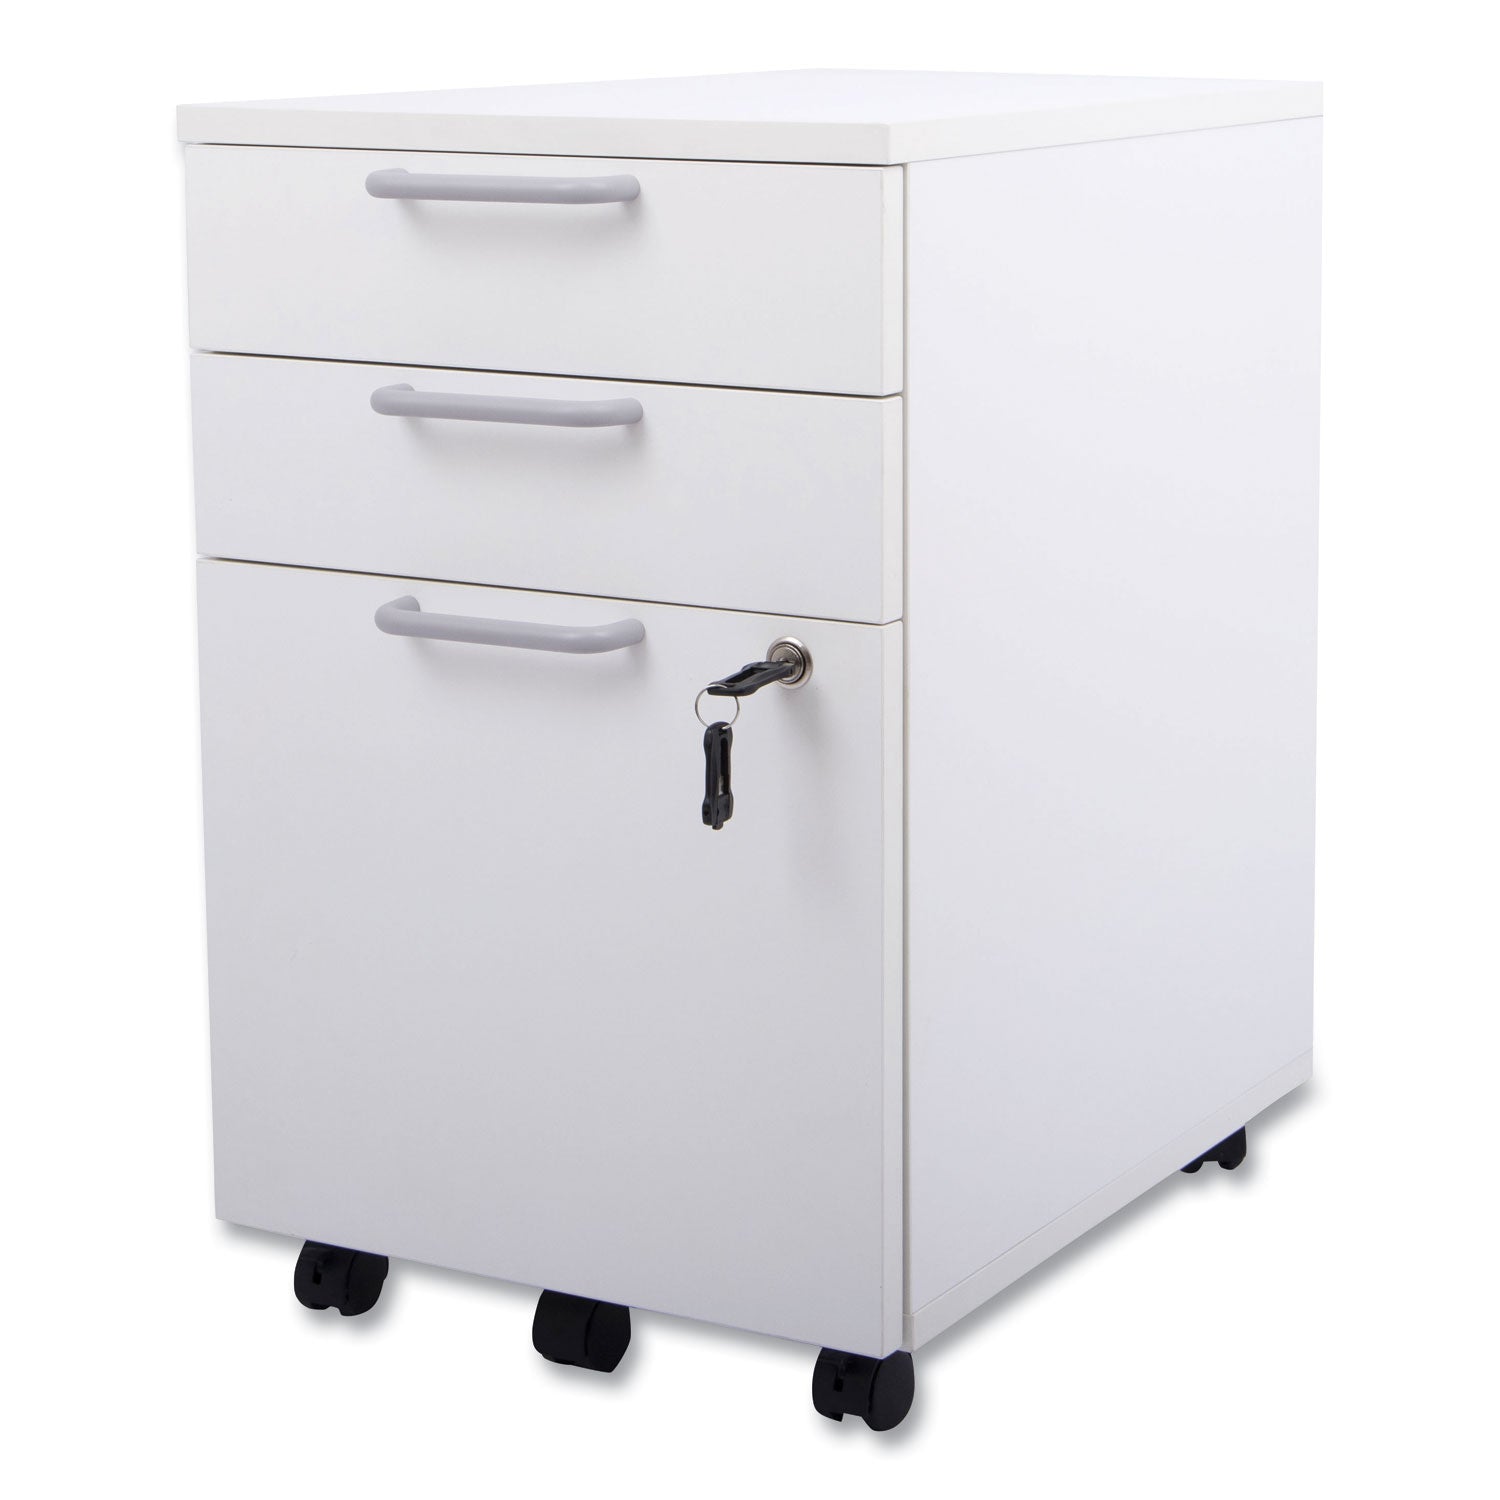 essentials-mobile-pedestal-file-left-or-right-3-drawers-box-box-file-legal-letter-white-156-x-213-x-243_uos24398956 - 3